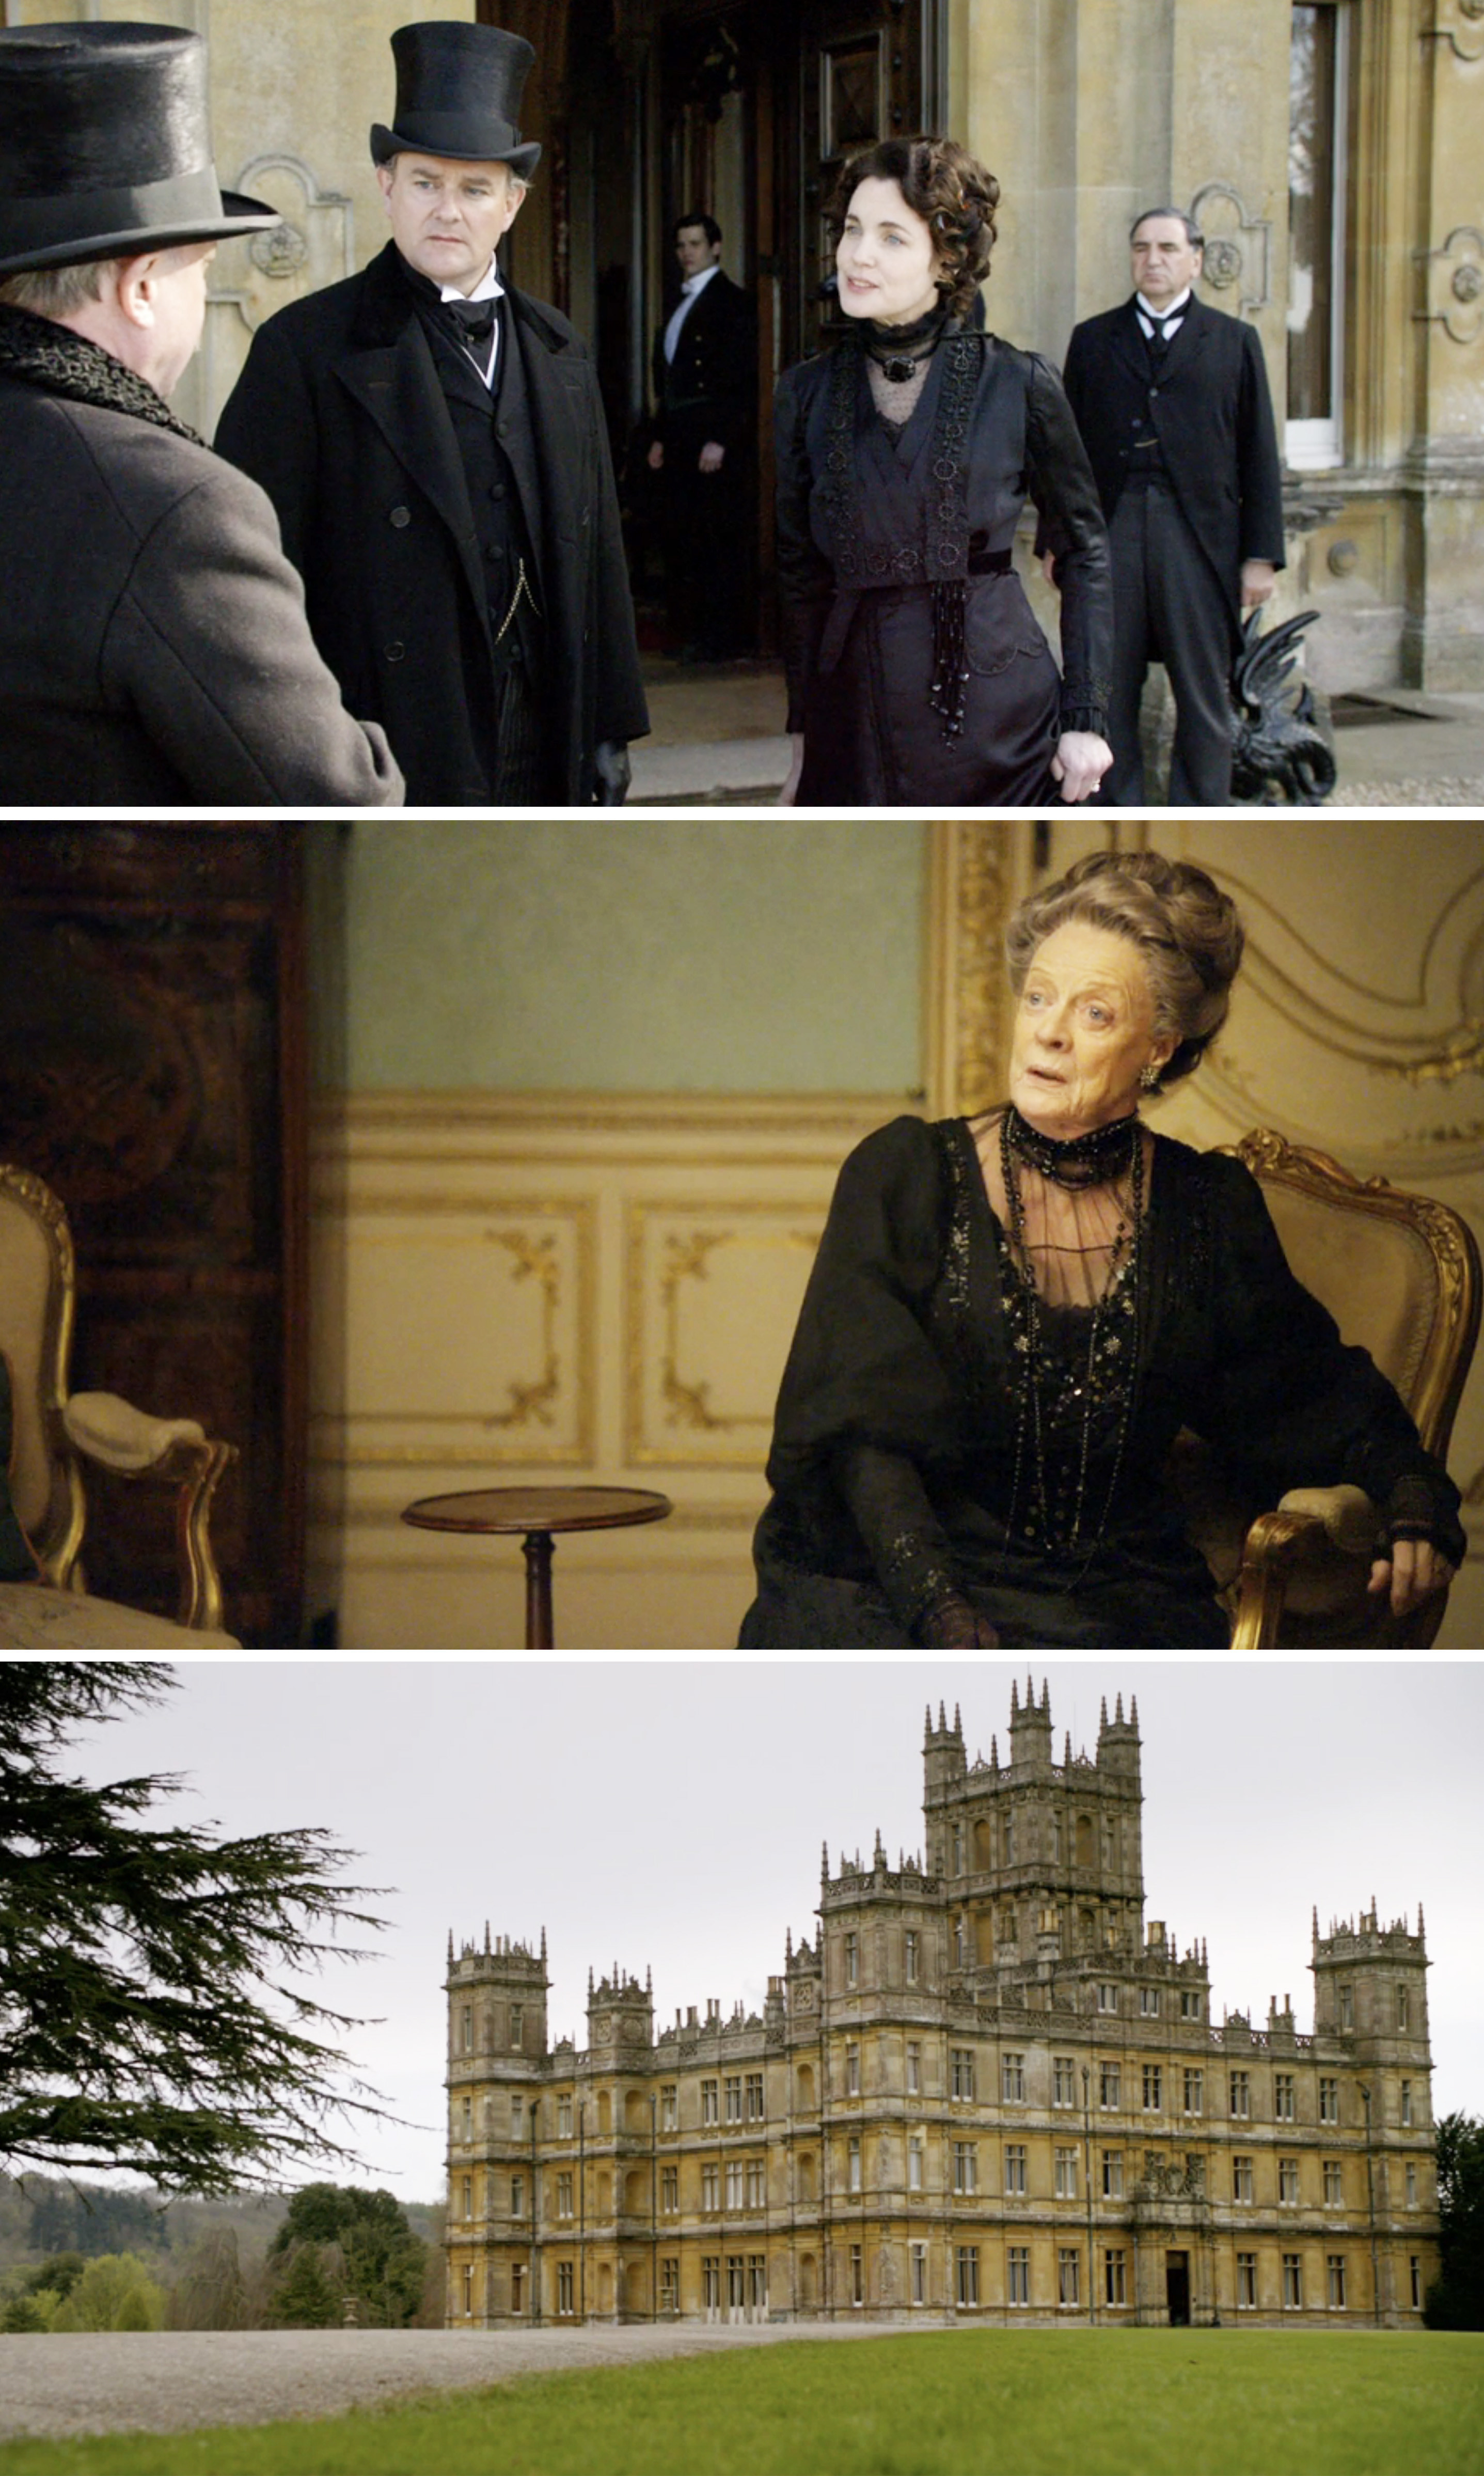 Scenes from Downton Abbey